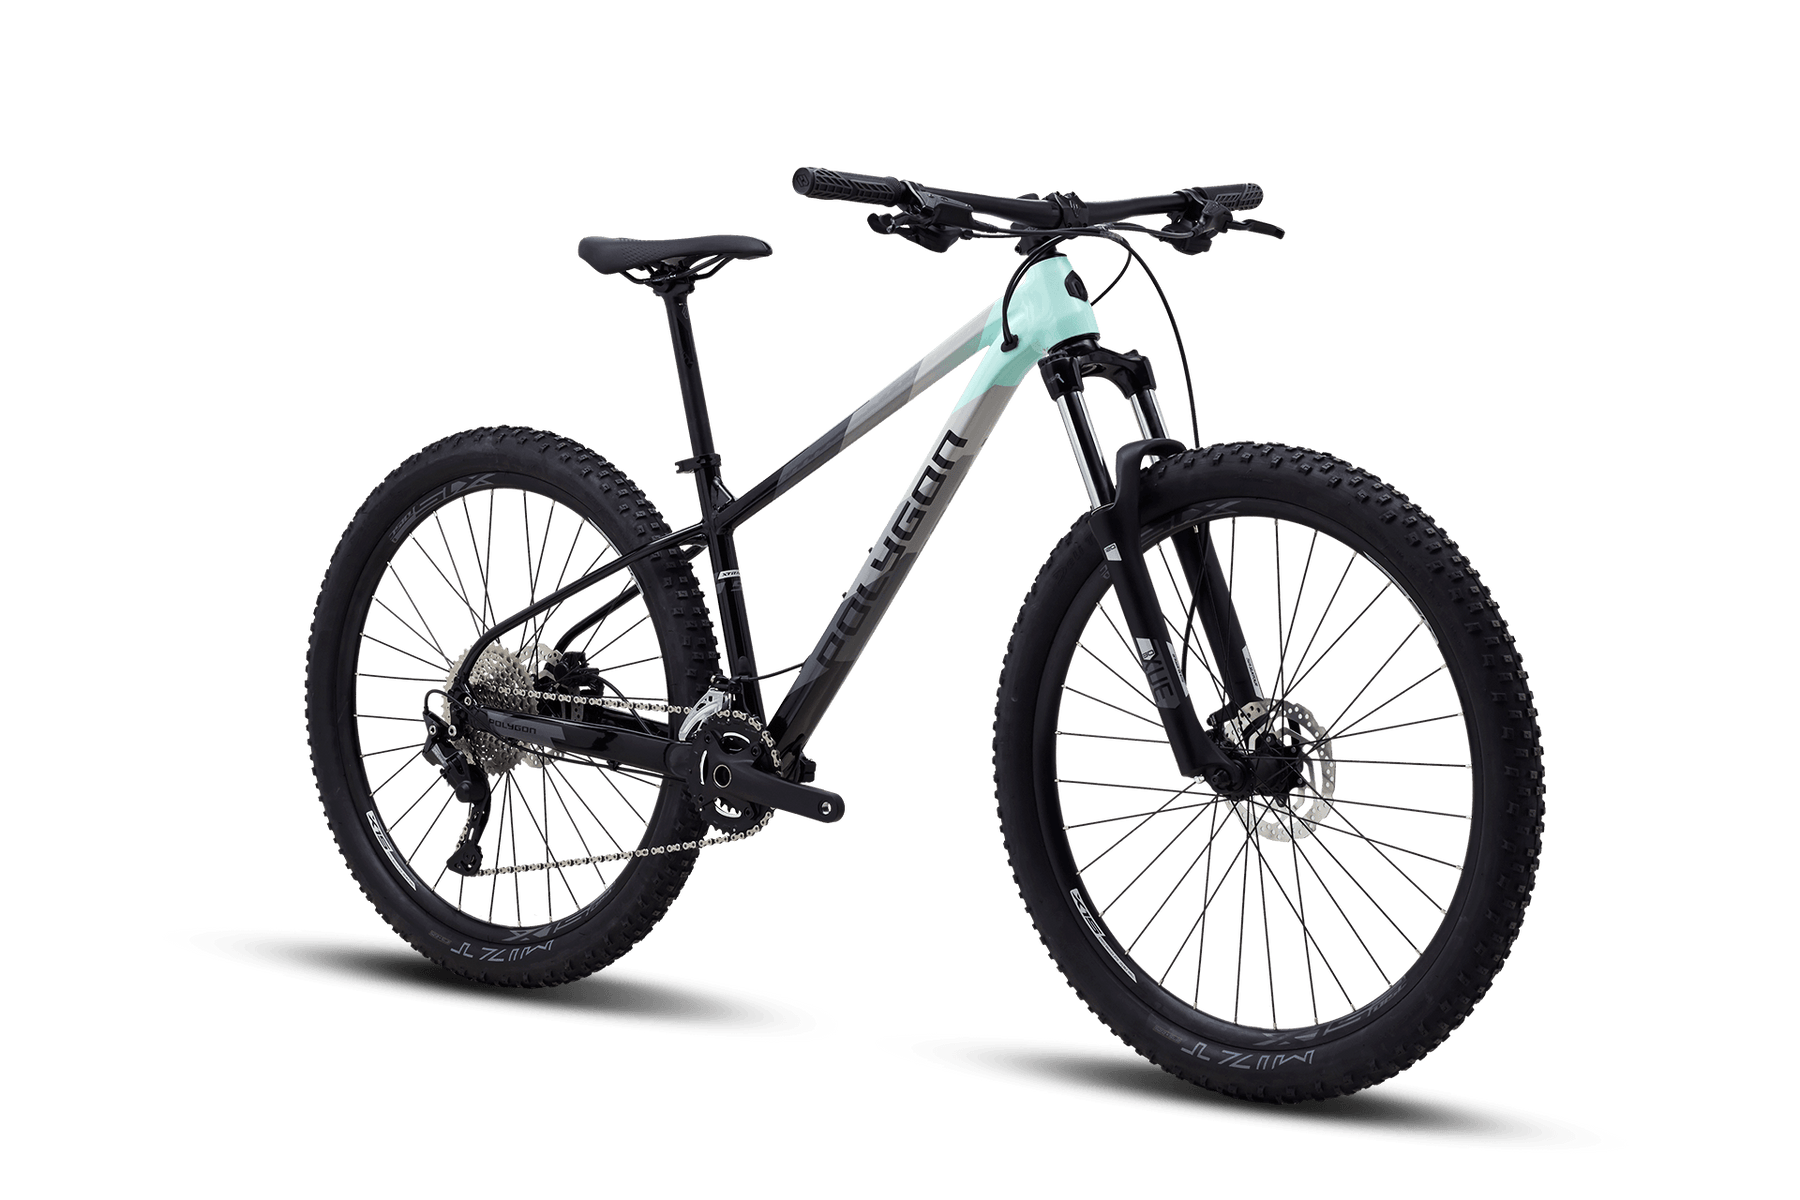 Polygon Xtrada 5 MTB Bicycle (2021) | Buy Online in India from Cyclop.in